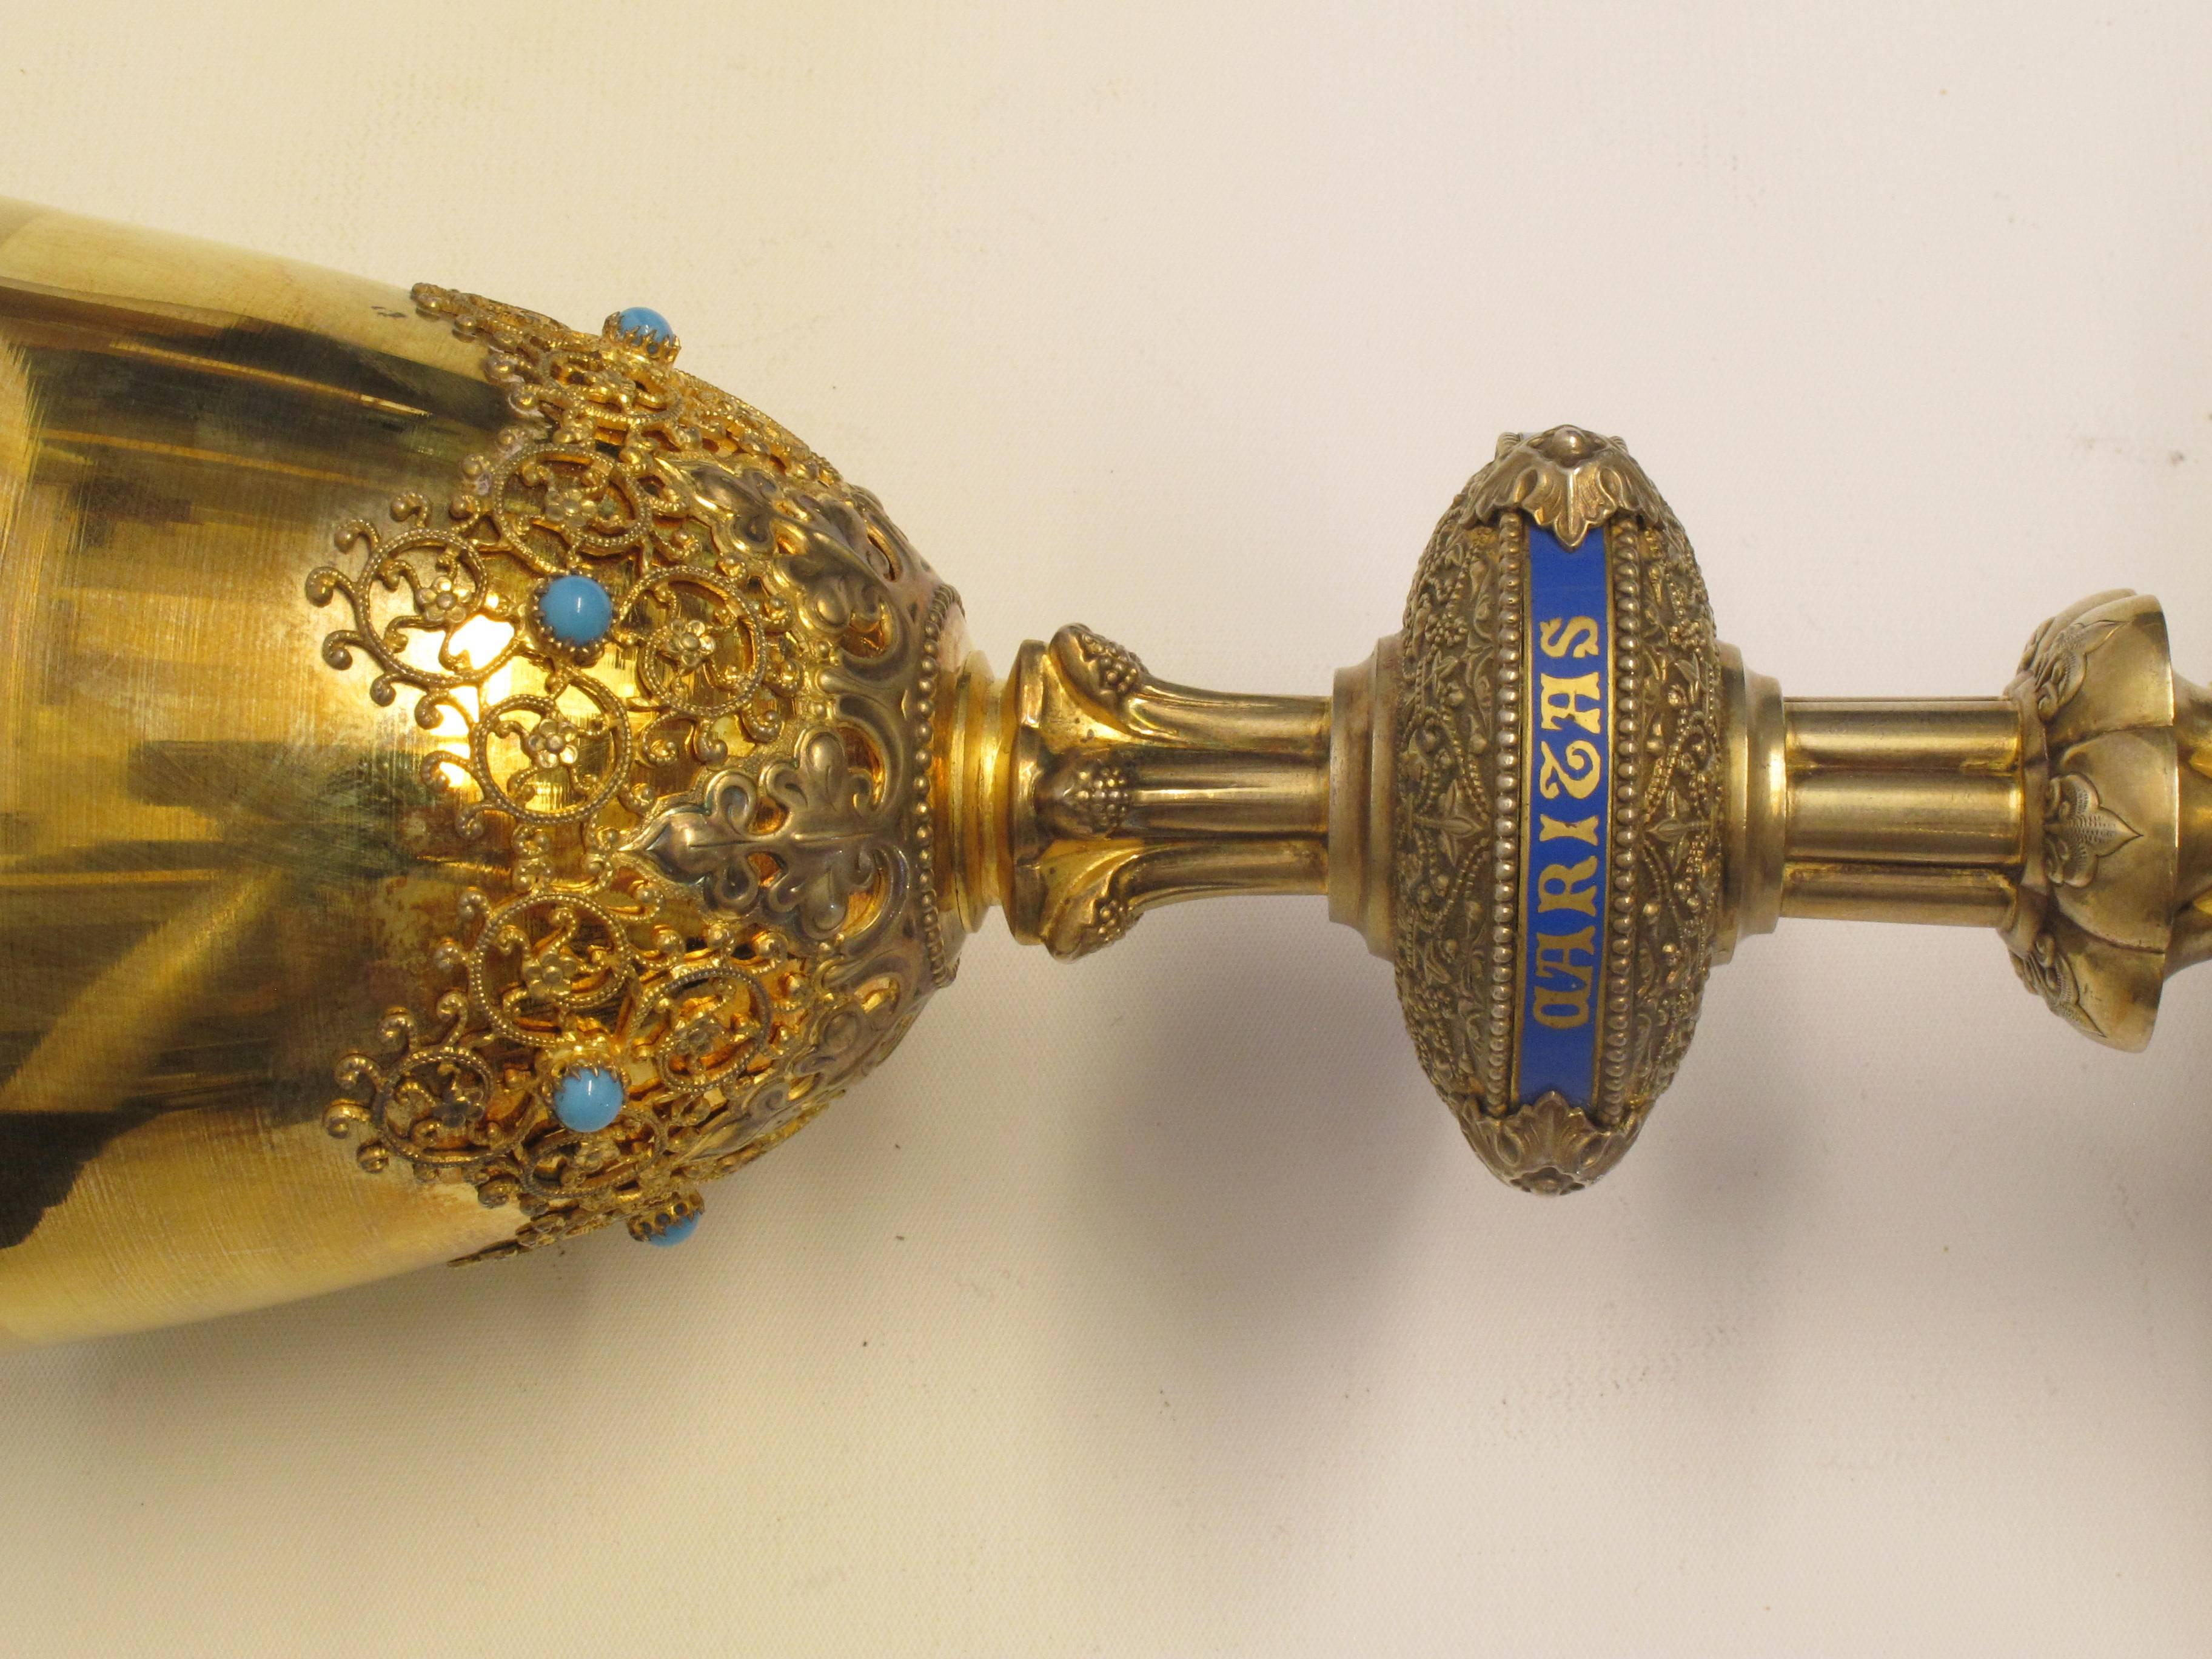 19th Century French Gilt Silver, Enamel, and Turquoise Chalice and Paten For Sale 3